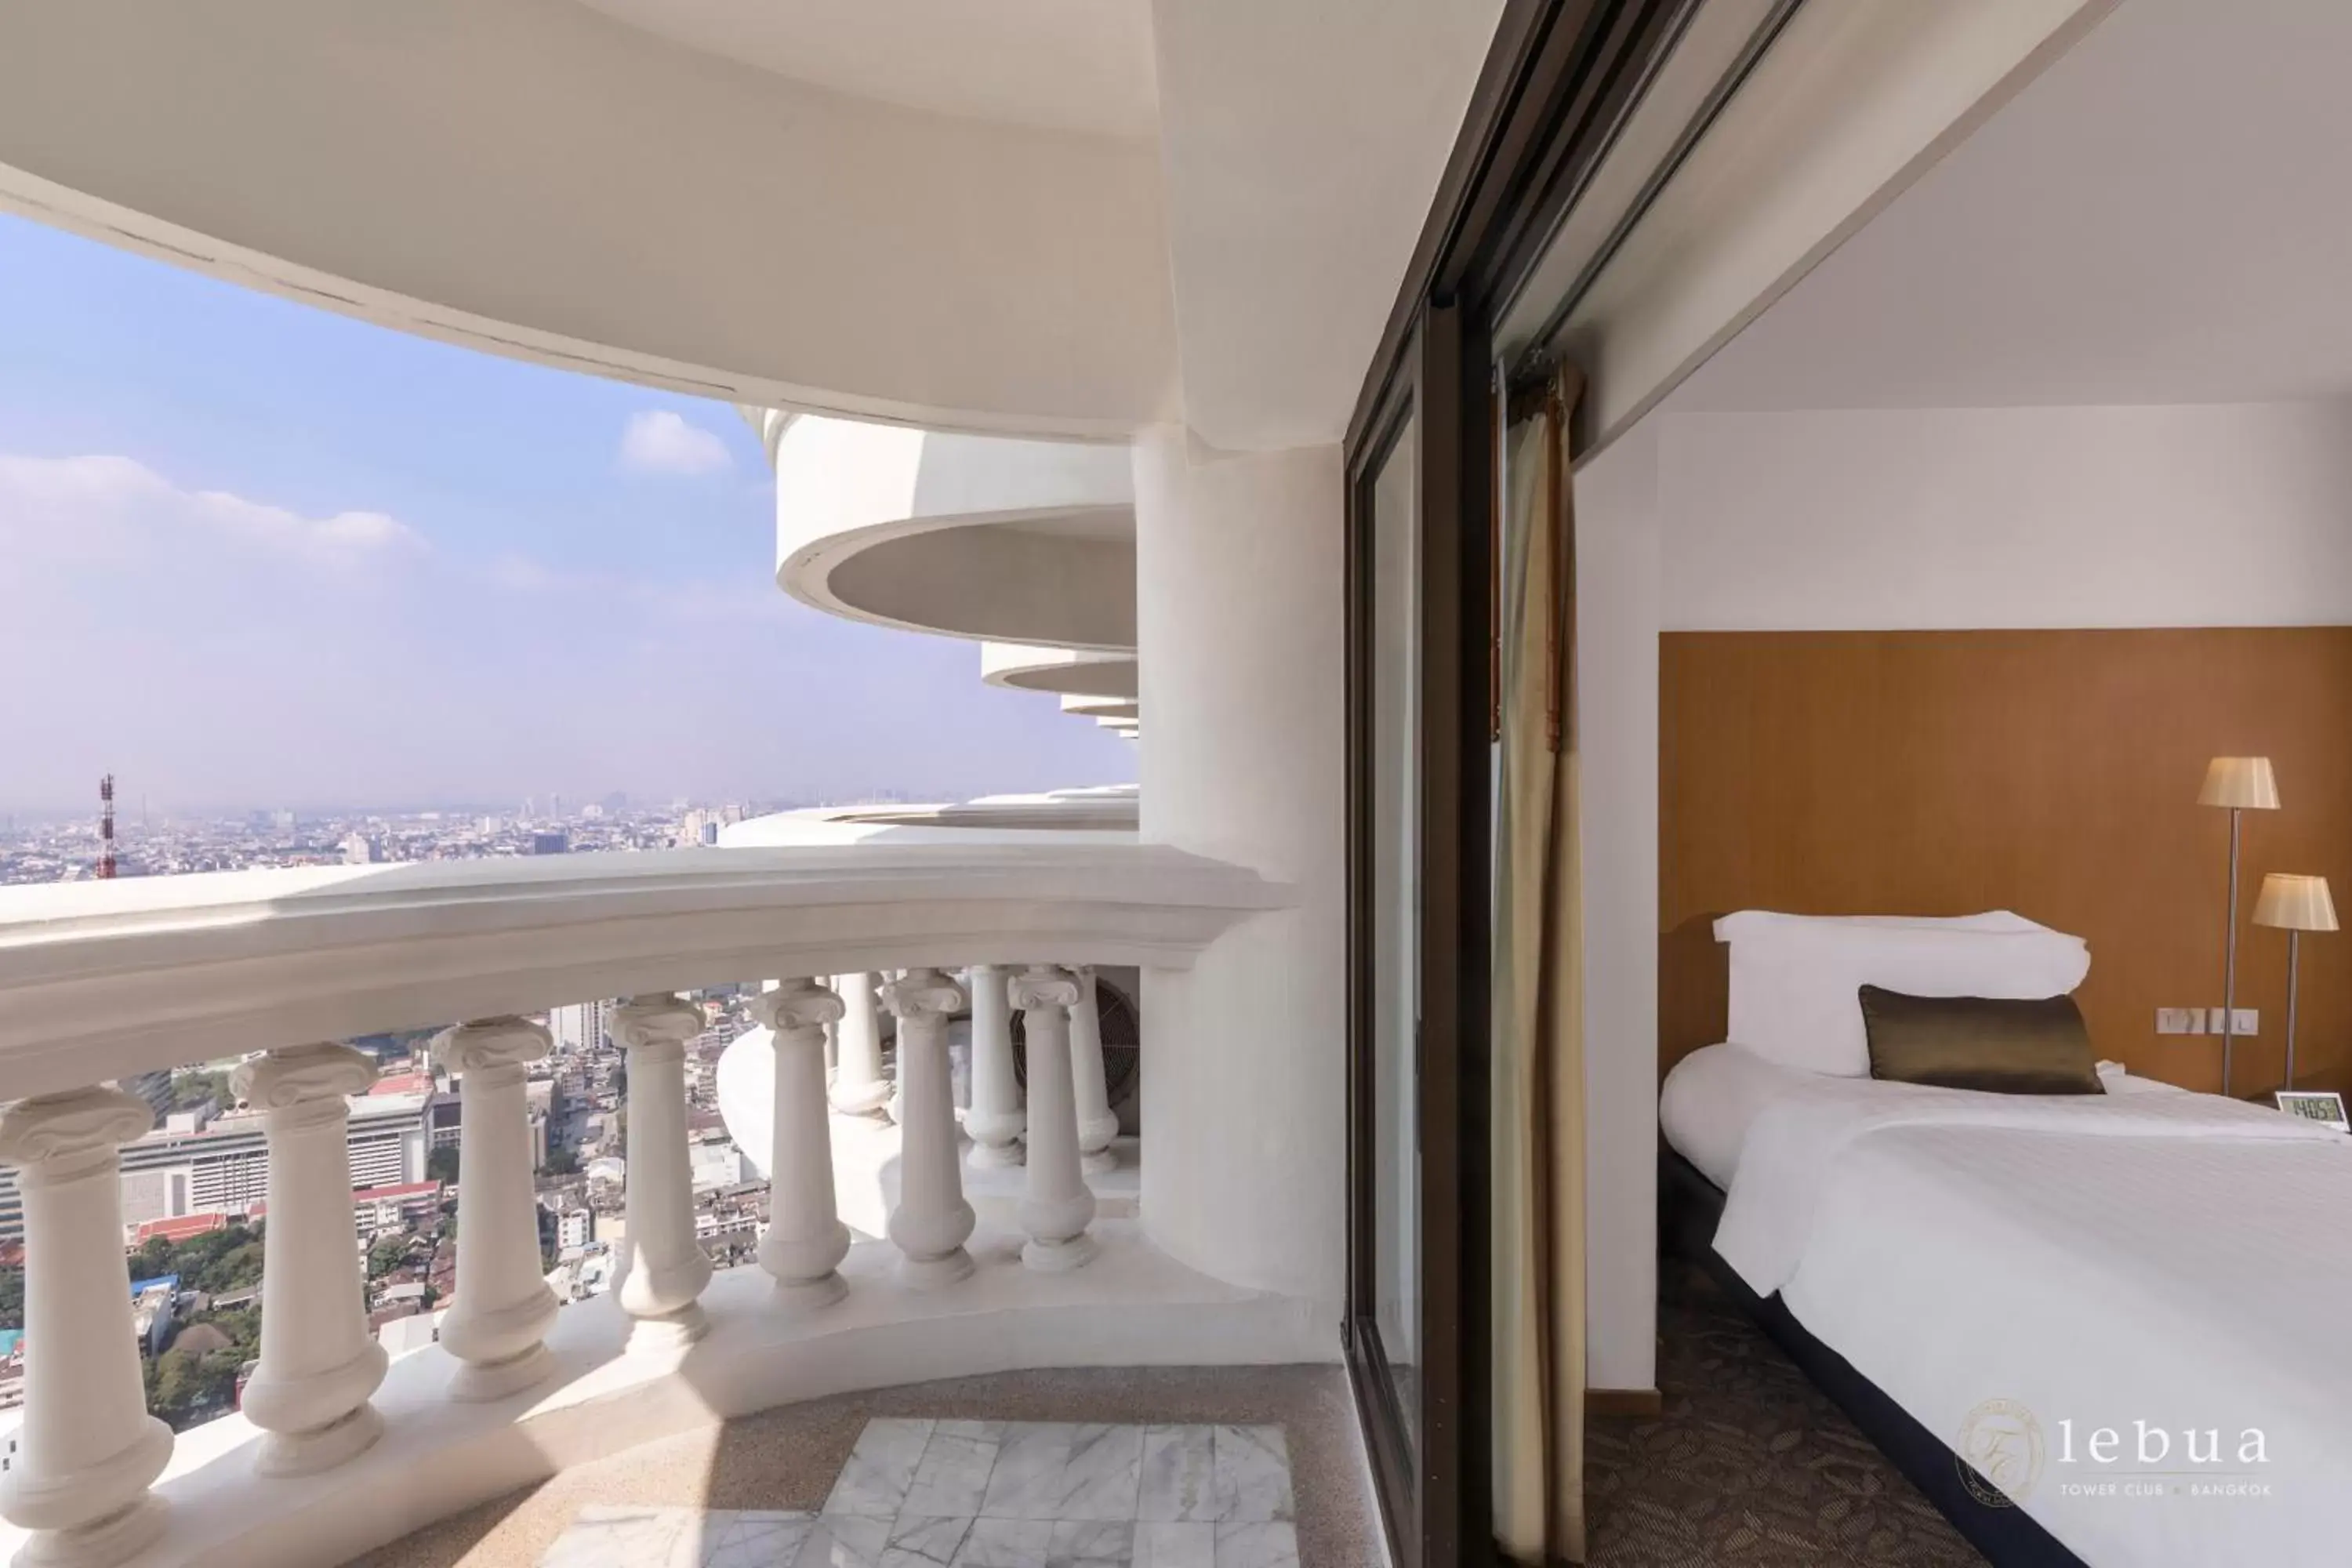 Bedroom in Tower Club at lebua